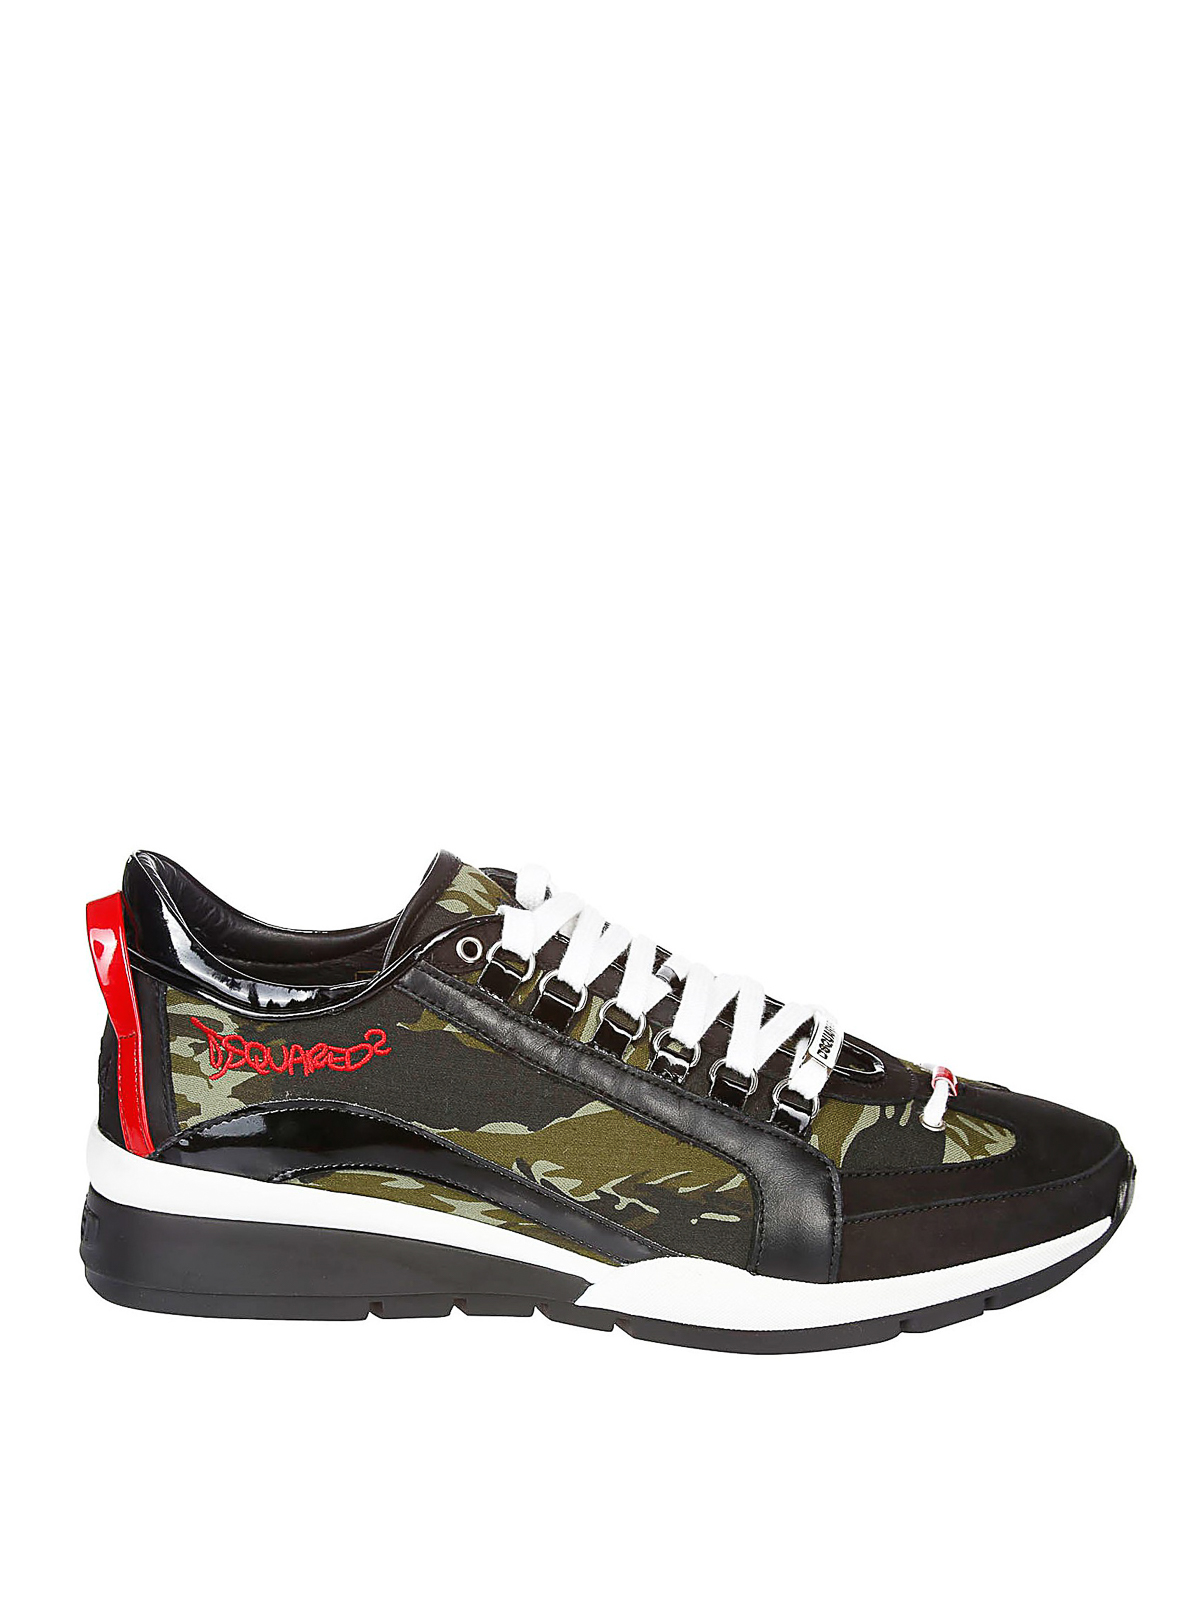 dsquared sneakers military